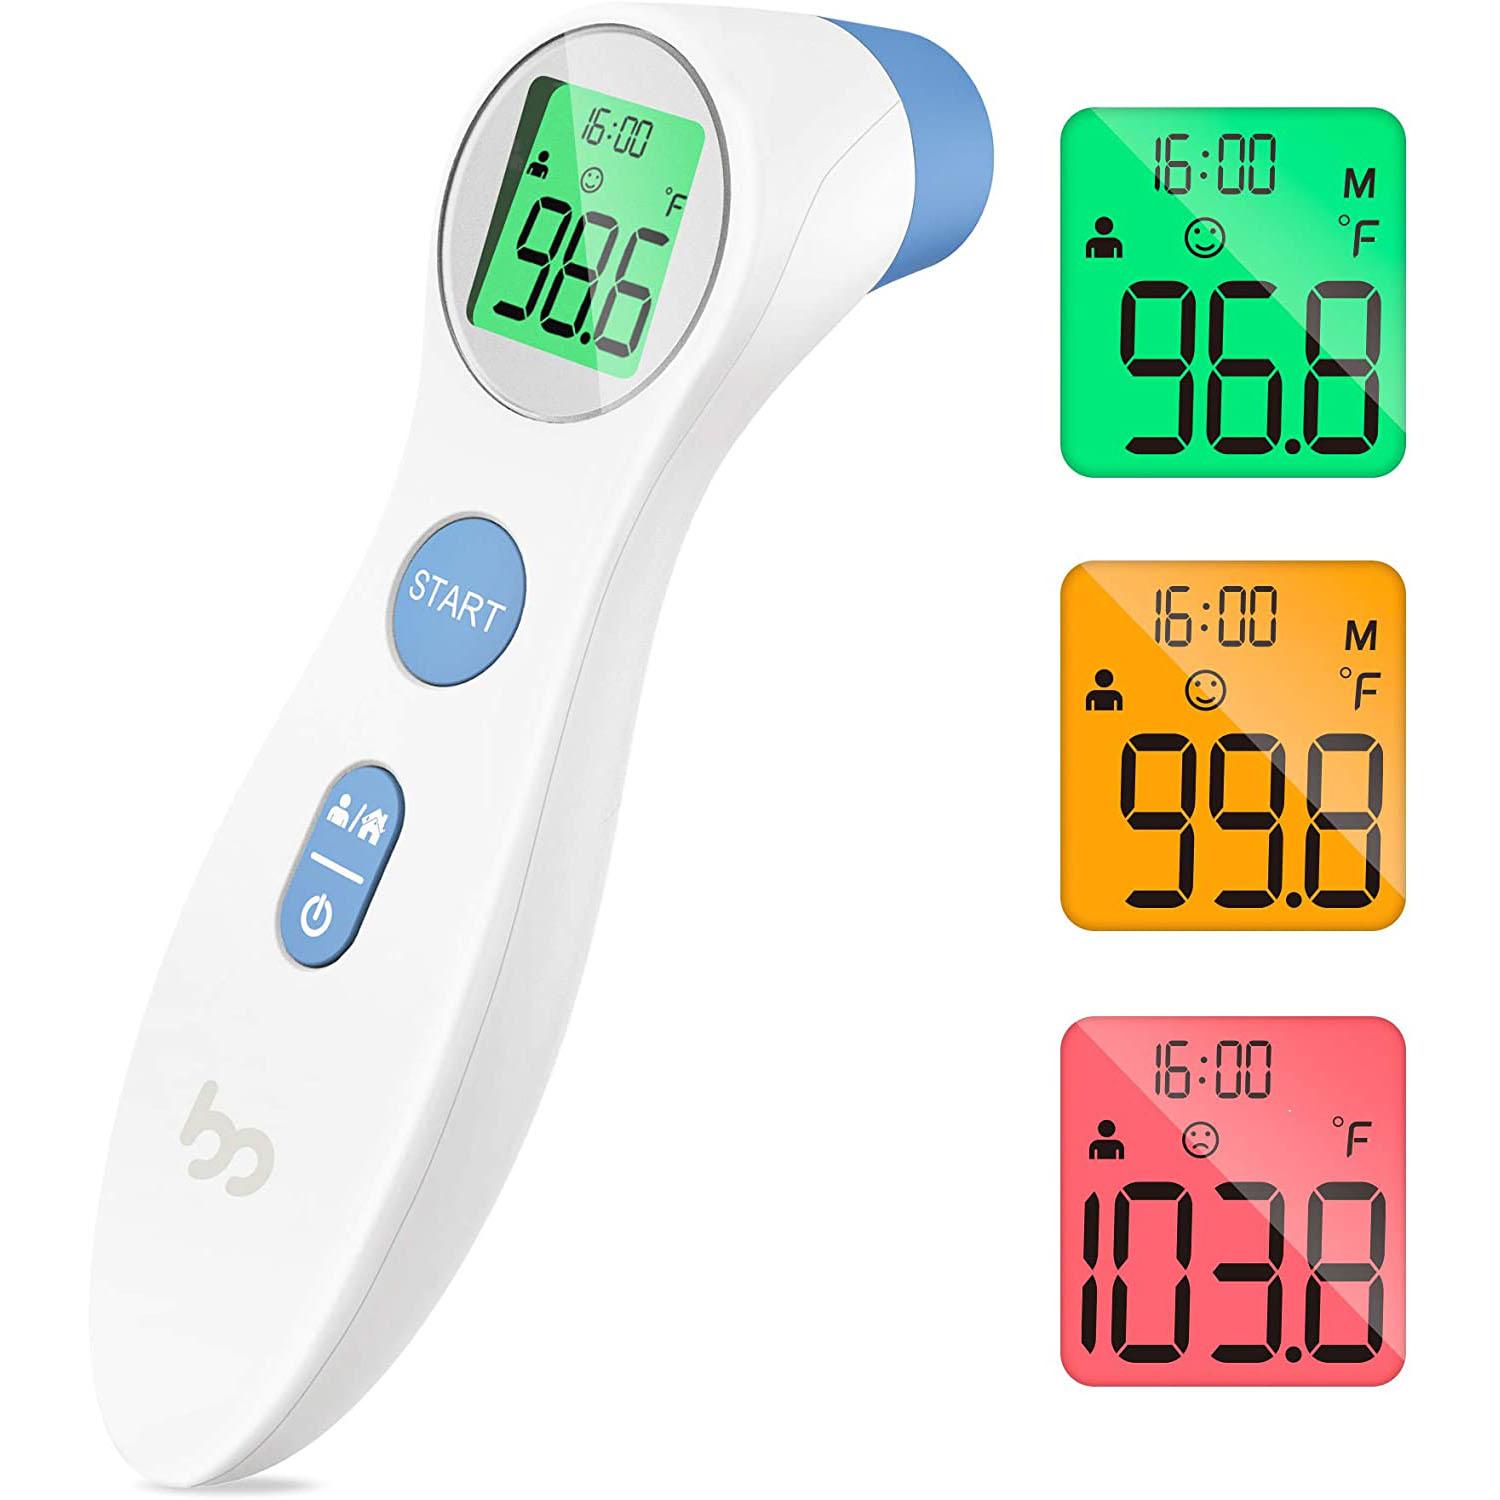 Femometer Infrared Non-Contact Forehead Thermometer for $4.32